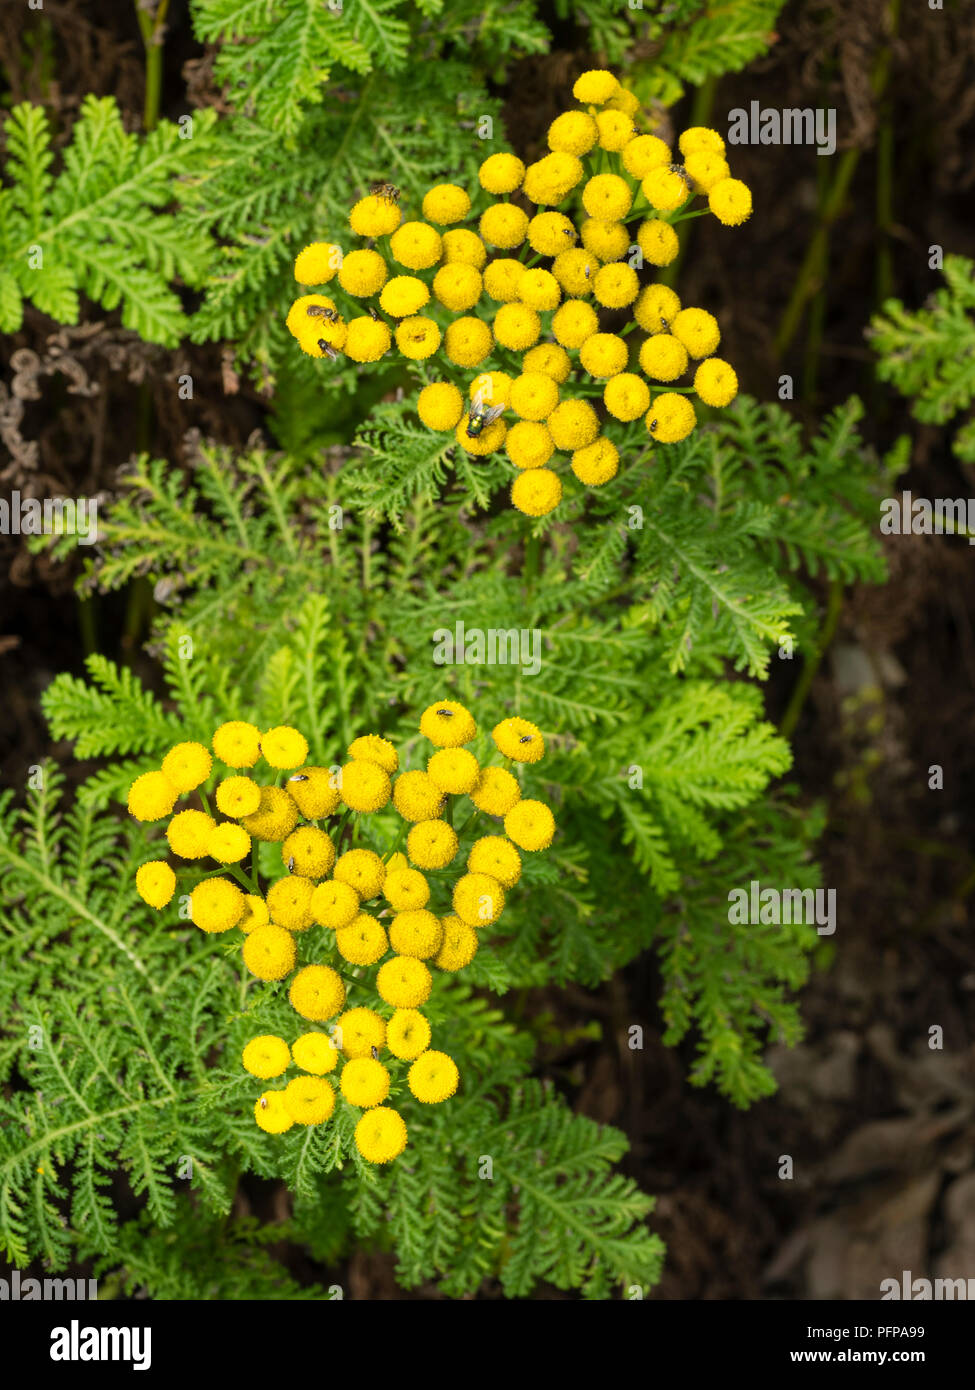 Yellow button flowers and ferny foliage of tansy, Tanacetum vulgare, a medicinal herb which is toxic in larger quantities Stock Photo